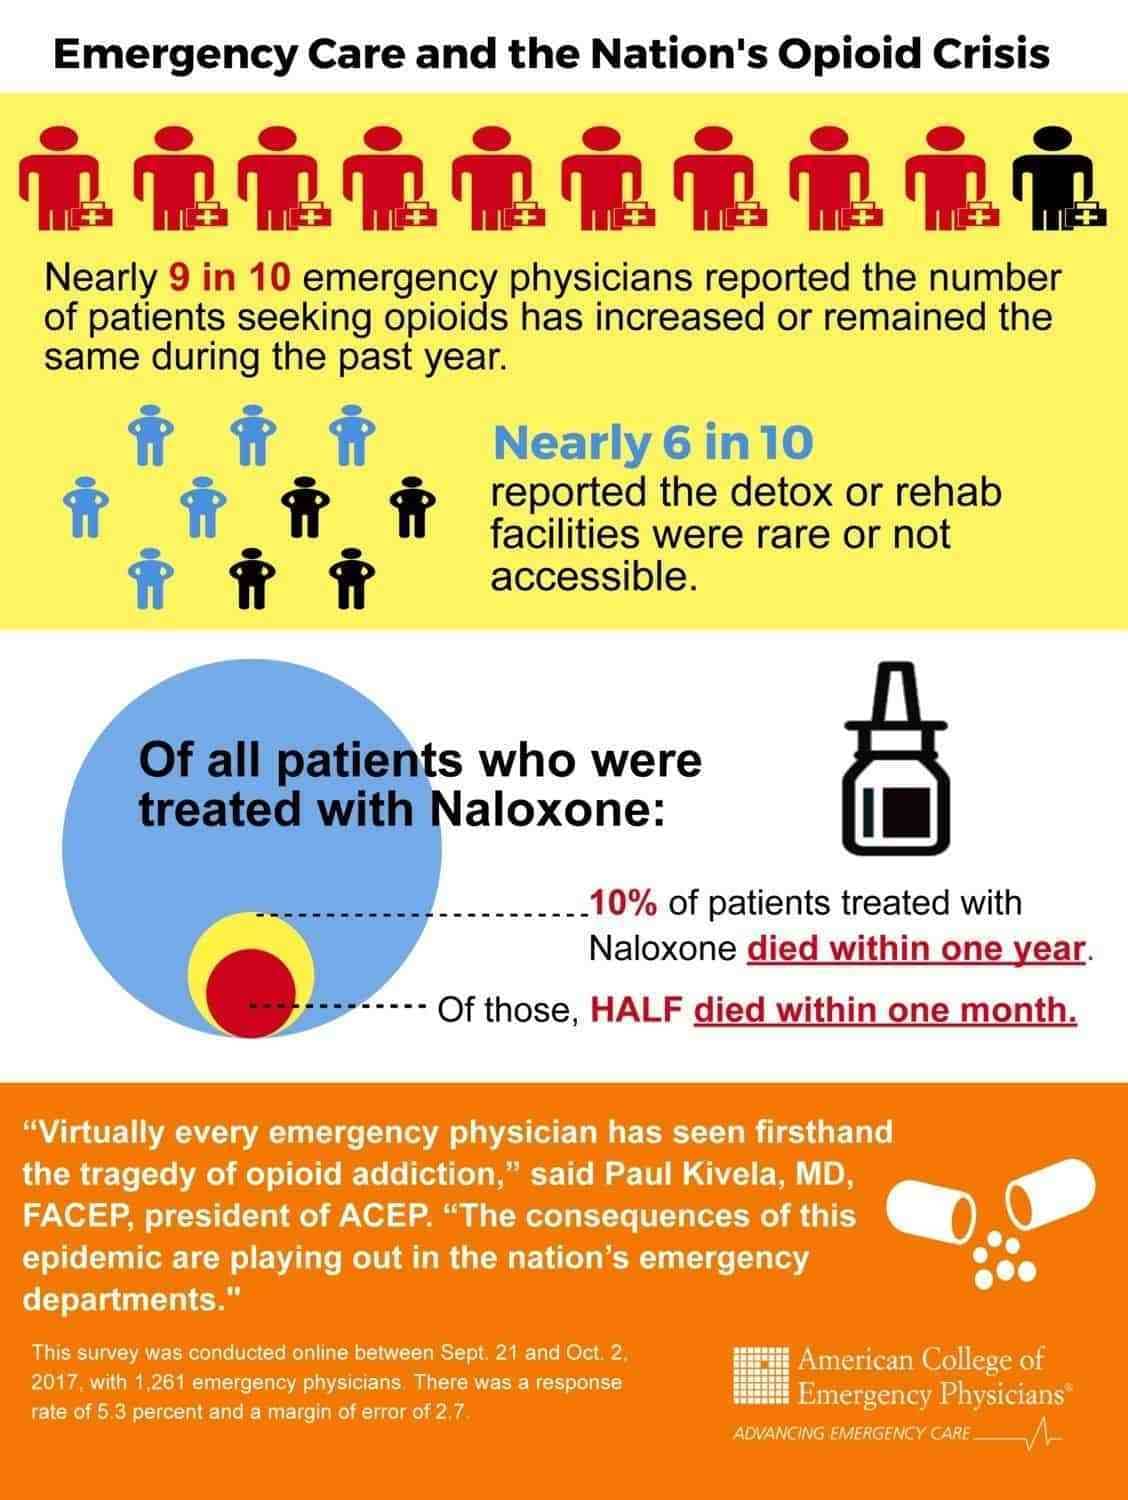 Emergency Care and the Nations opioid crisis infographic image